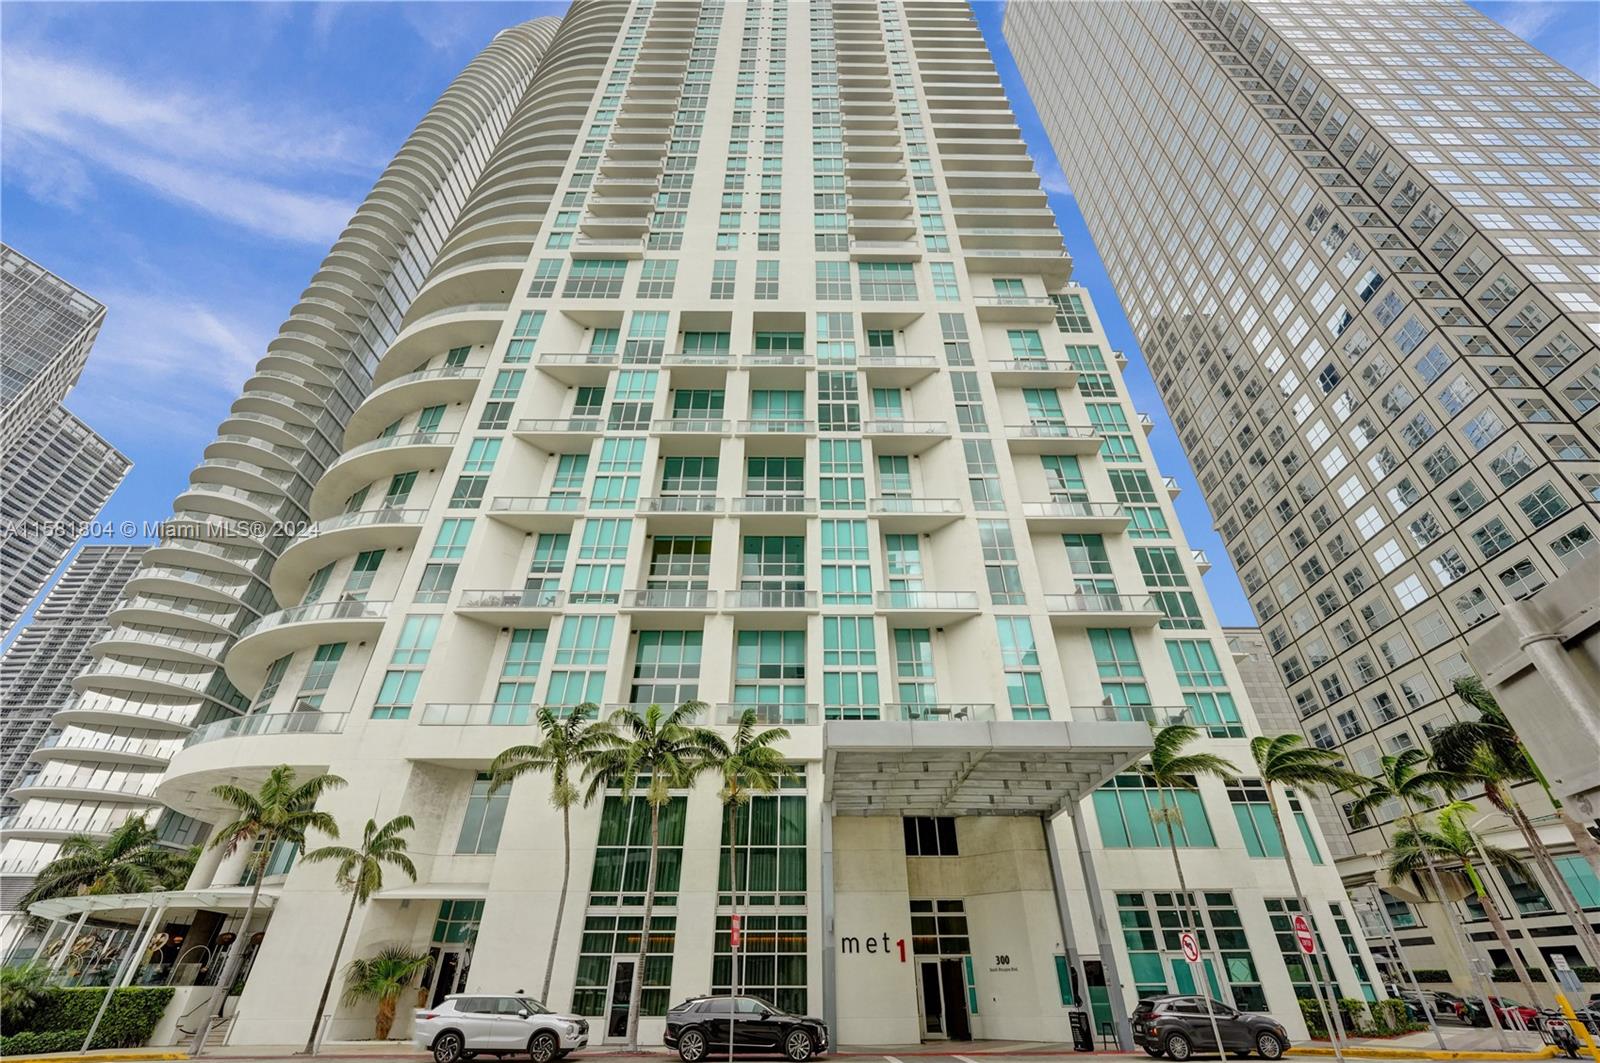 Located in the most desirable corner of Biscayne Bay, this 1-bedroom unit offers relaxing city views. Interior features include porcelain flooring, stainless steel appliances, marble countertops, and Italian cabinets. Enjoy the convenience of one assigned parking space. Met 1 amenities include valet parking, 24-hour front desk service, pool, gym, sauna, billiard room, business center, and party room. Strategically positioned for easy commuting: take the Metro-mover to Metrorail and Brightline train stations, or access I-95 by car. Explore nearby entertainment sites such as Bayfront Park, Bayside Shopping, Silverspot Cinema, and the American Airlines Arena. Perfect for your property investment or dream home !!